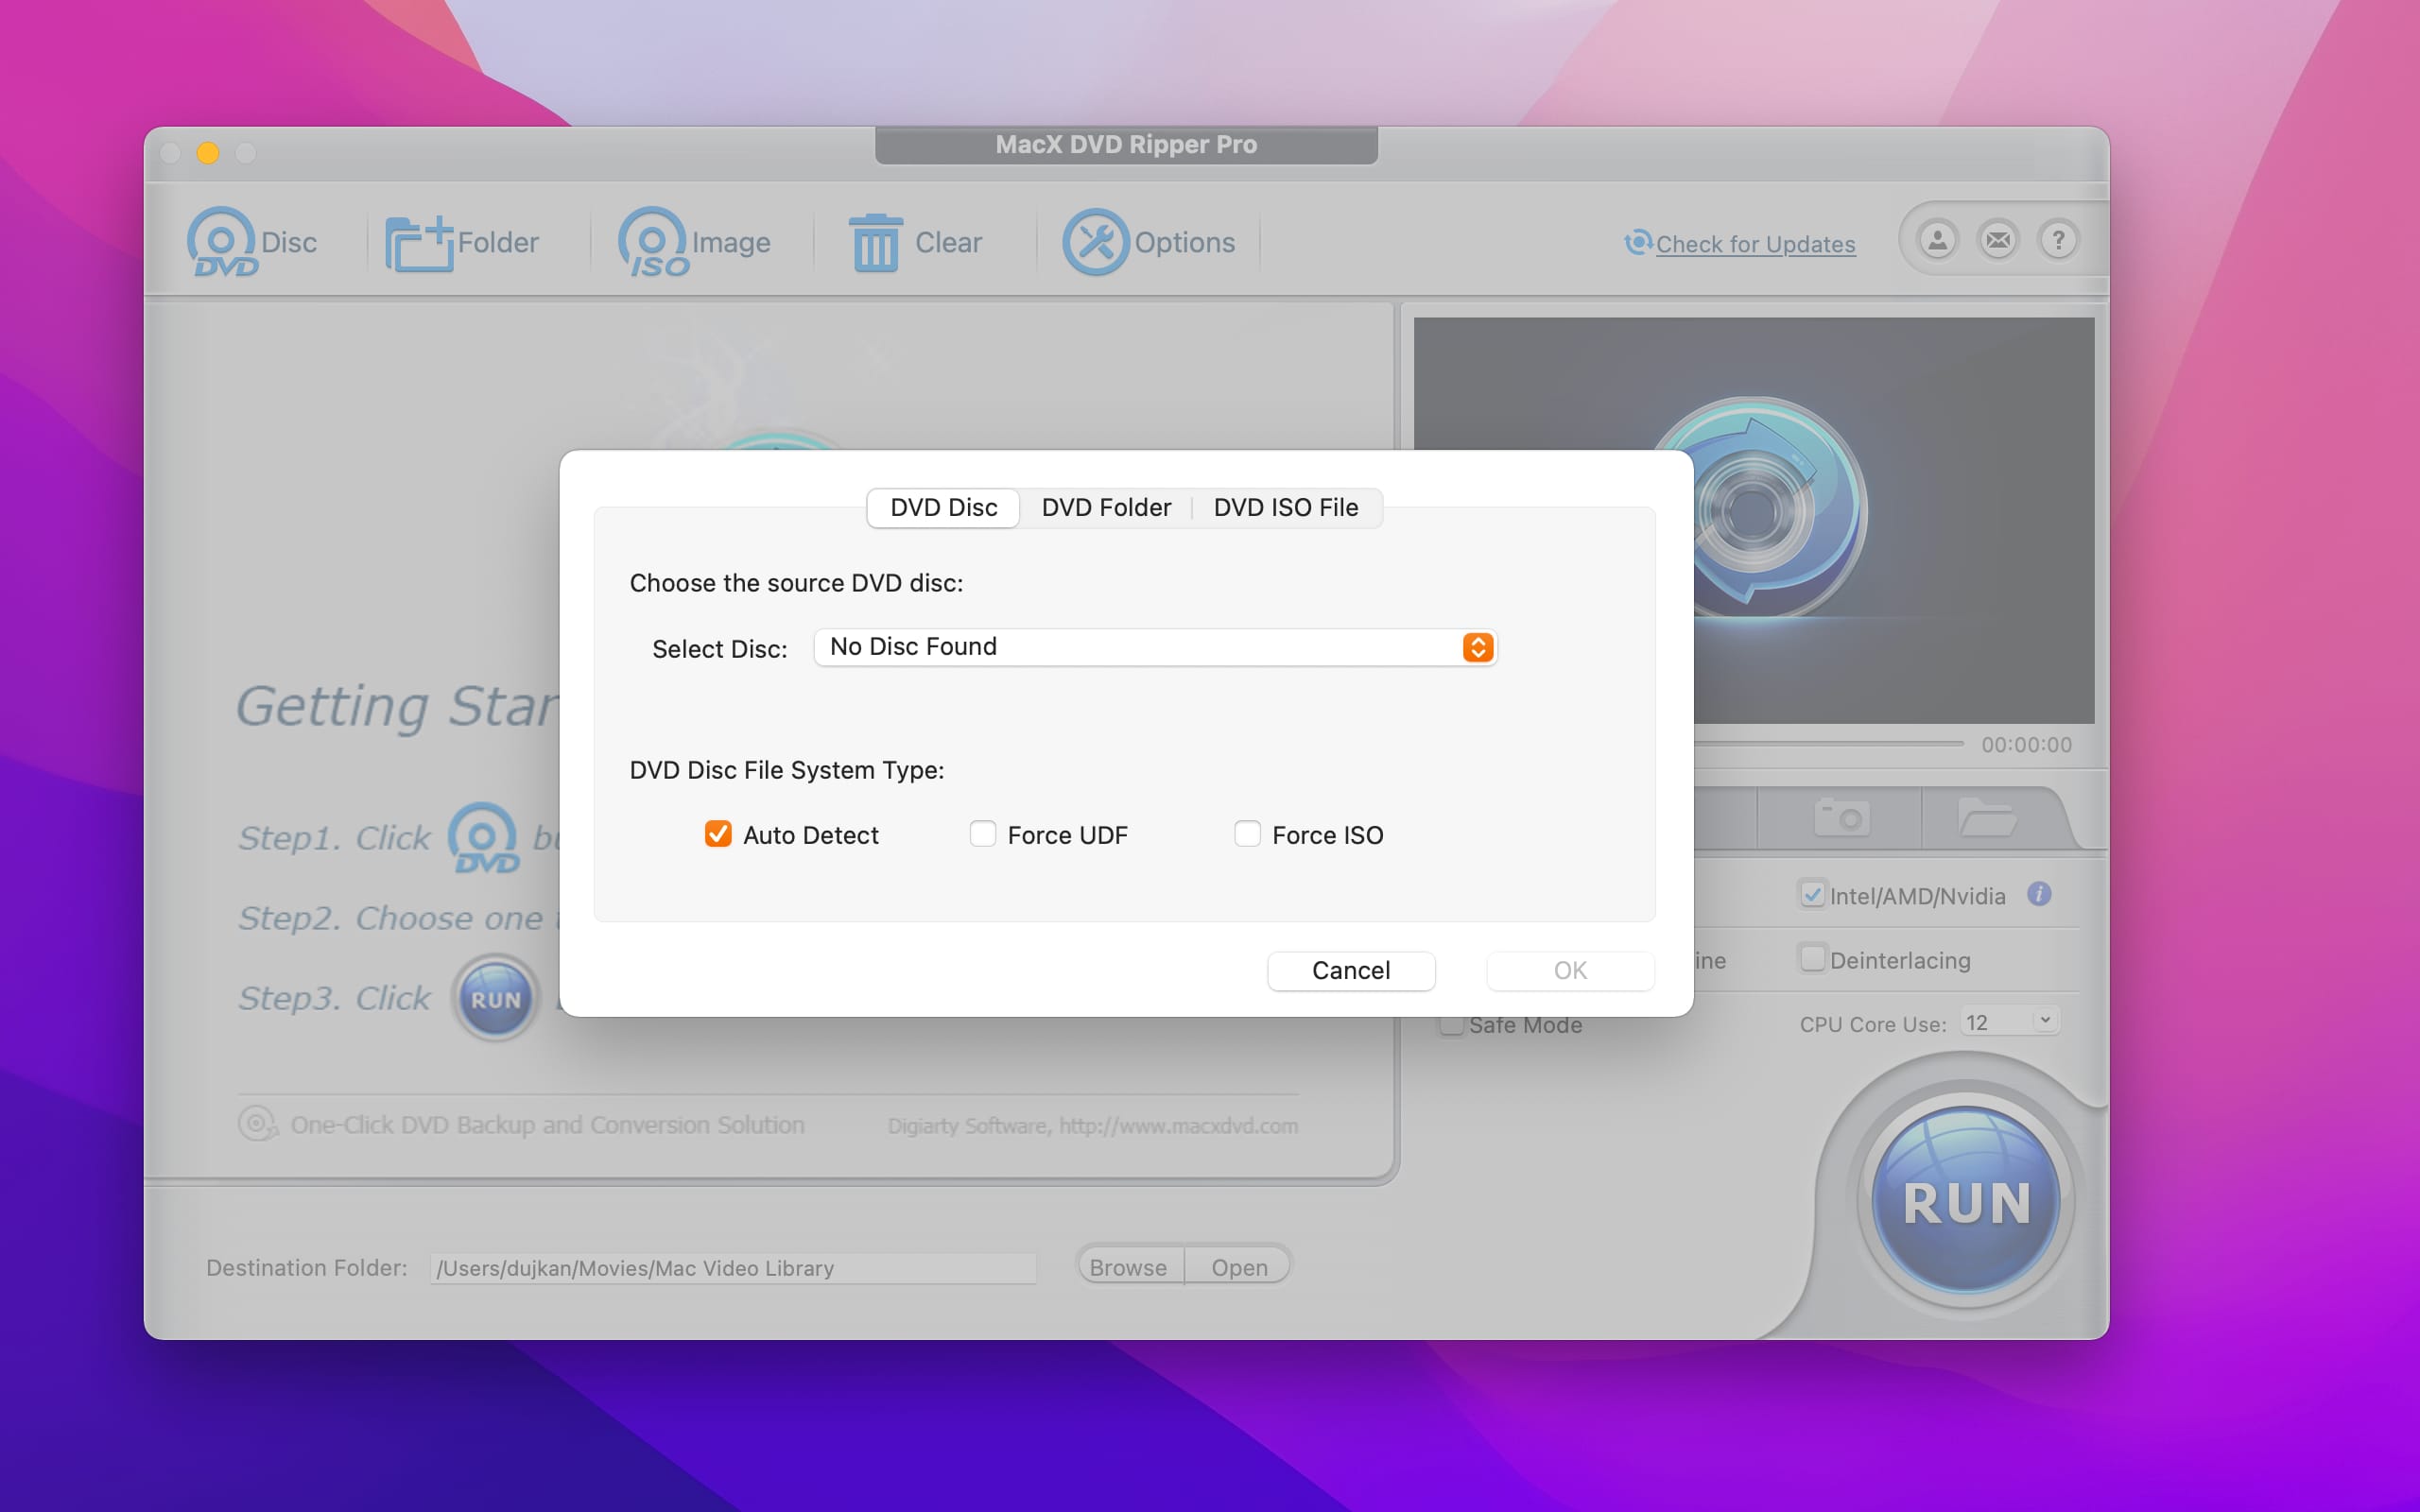 MacX DVD Ripper Pro for macOS with the importing features shown